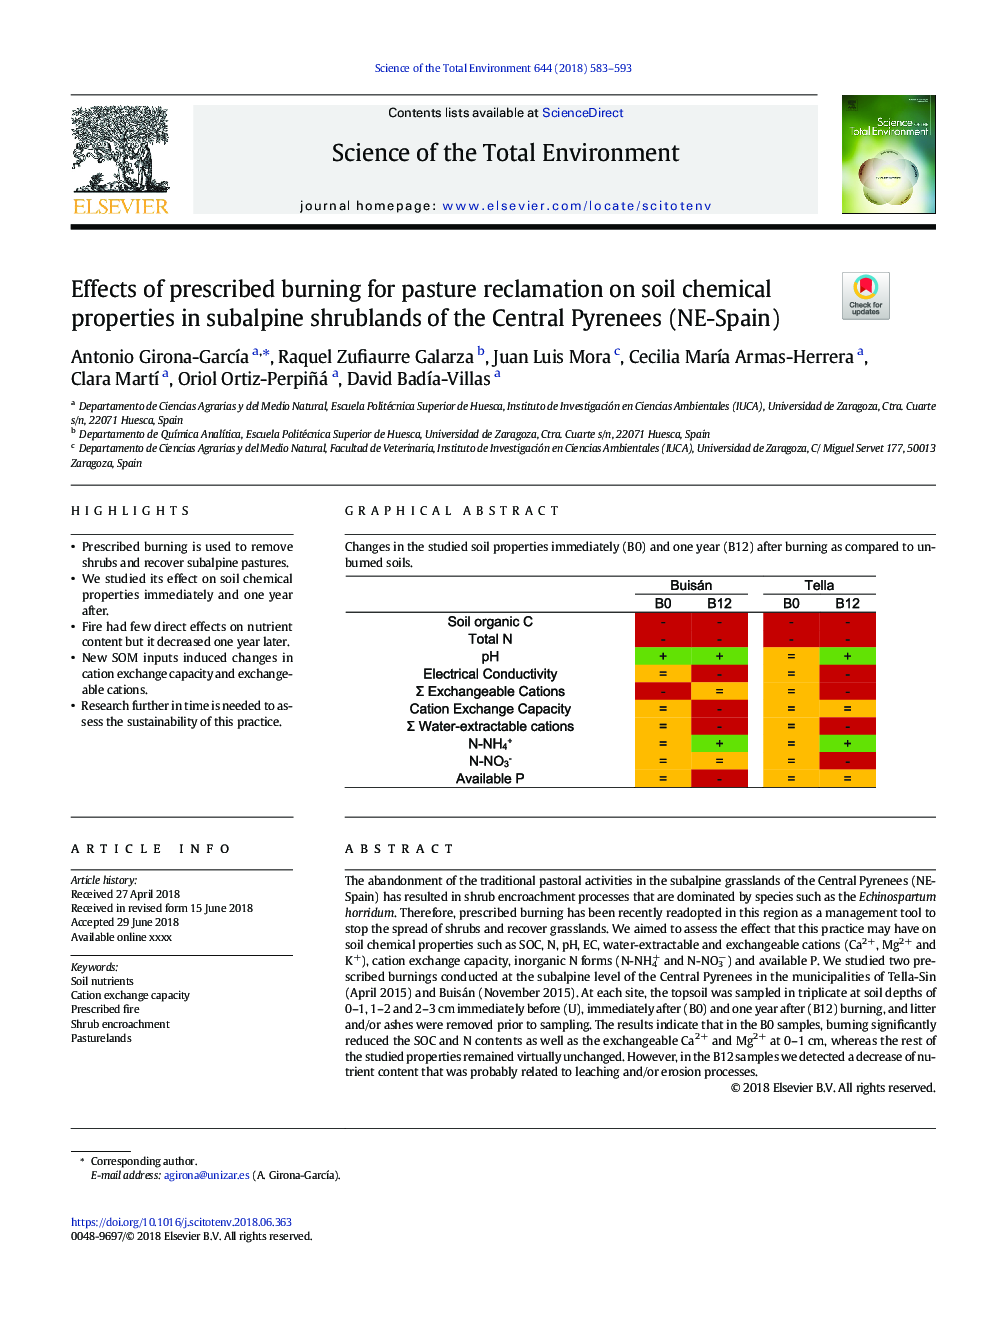 Effects of prescribed burning for pasture reclamation on soil chemical properties in subalpine shrublands of the Central Pyrenees (NE-Spain)